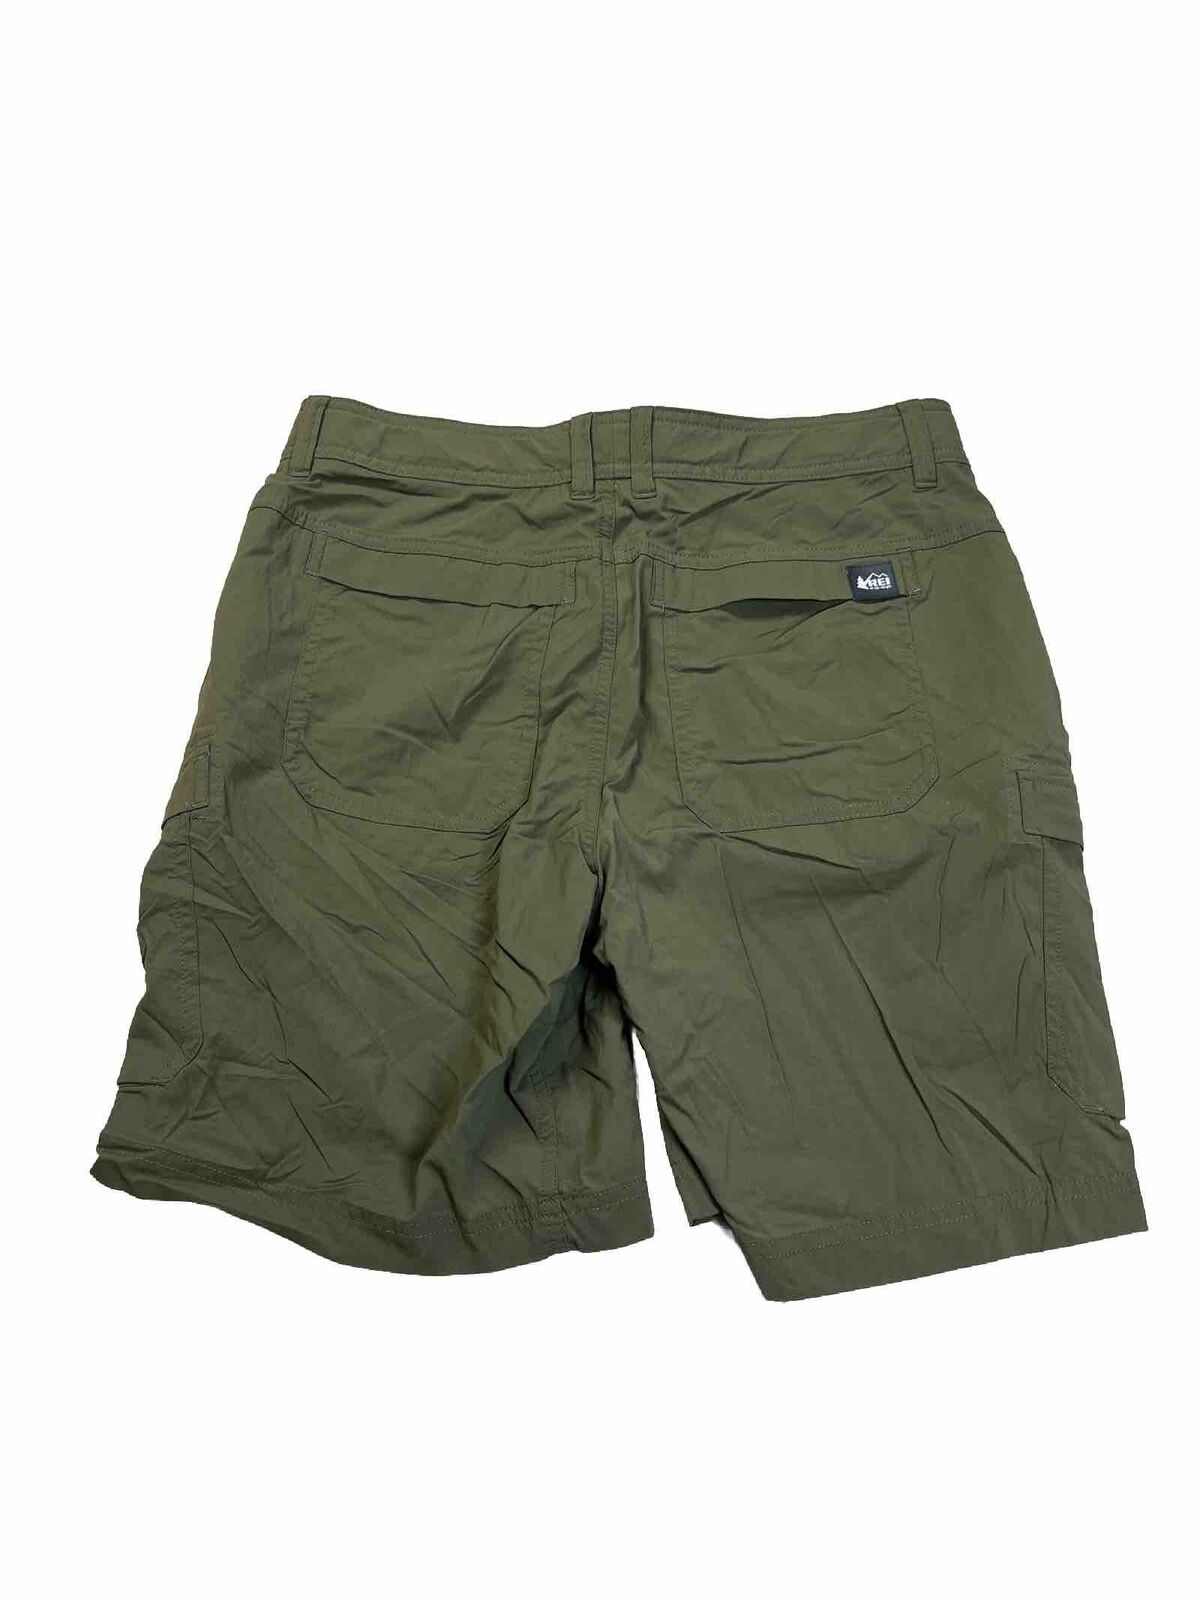 REI Women's Green Relaxed Fit Cargo Hiking Shorts - 8